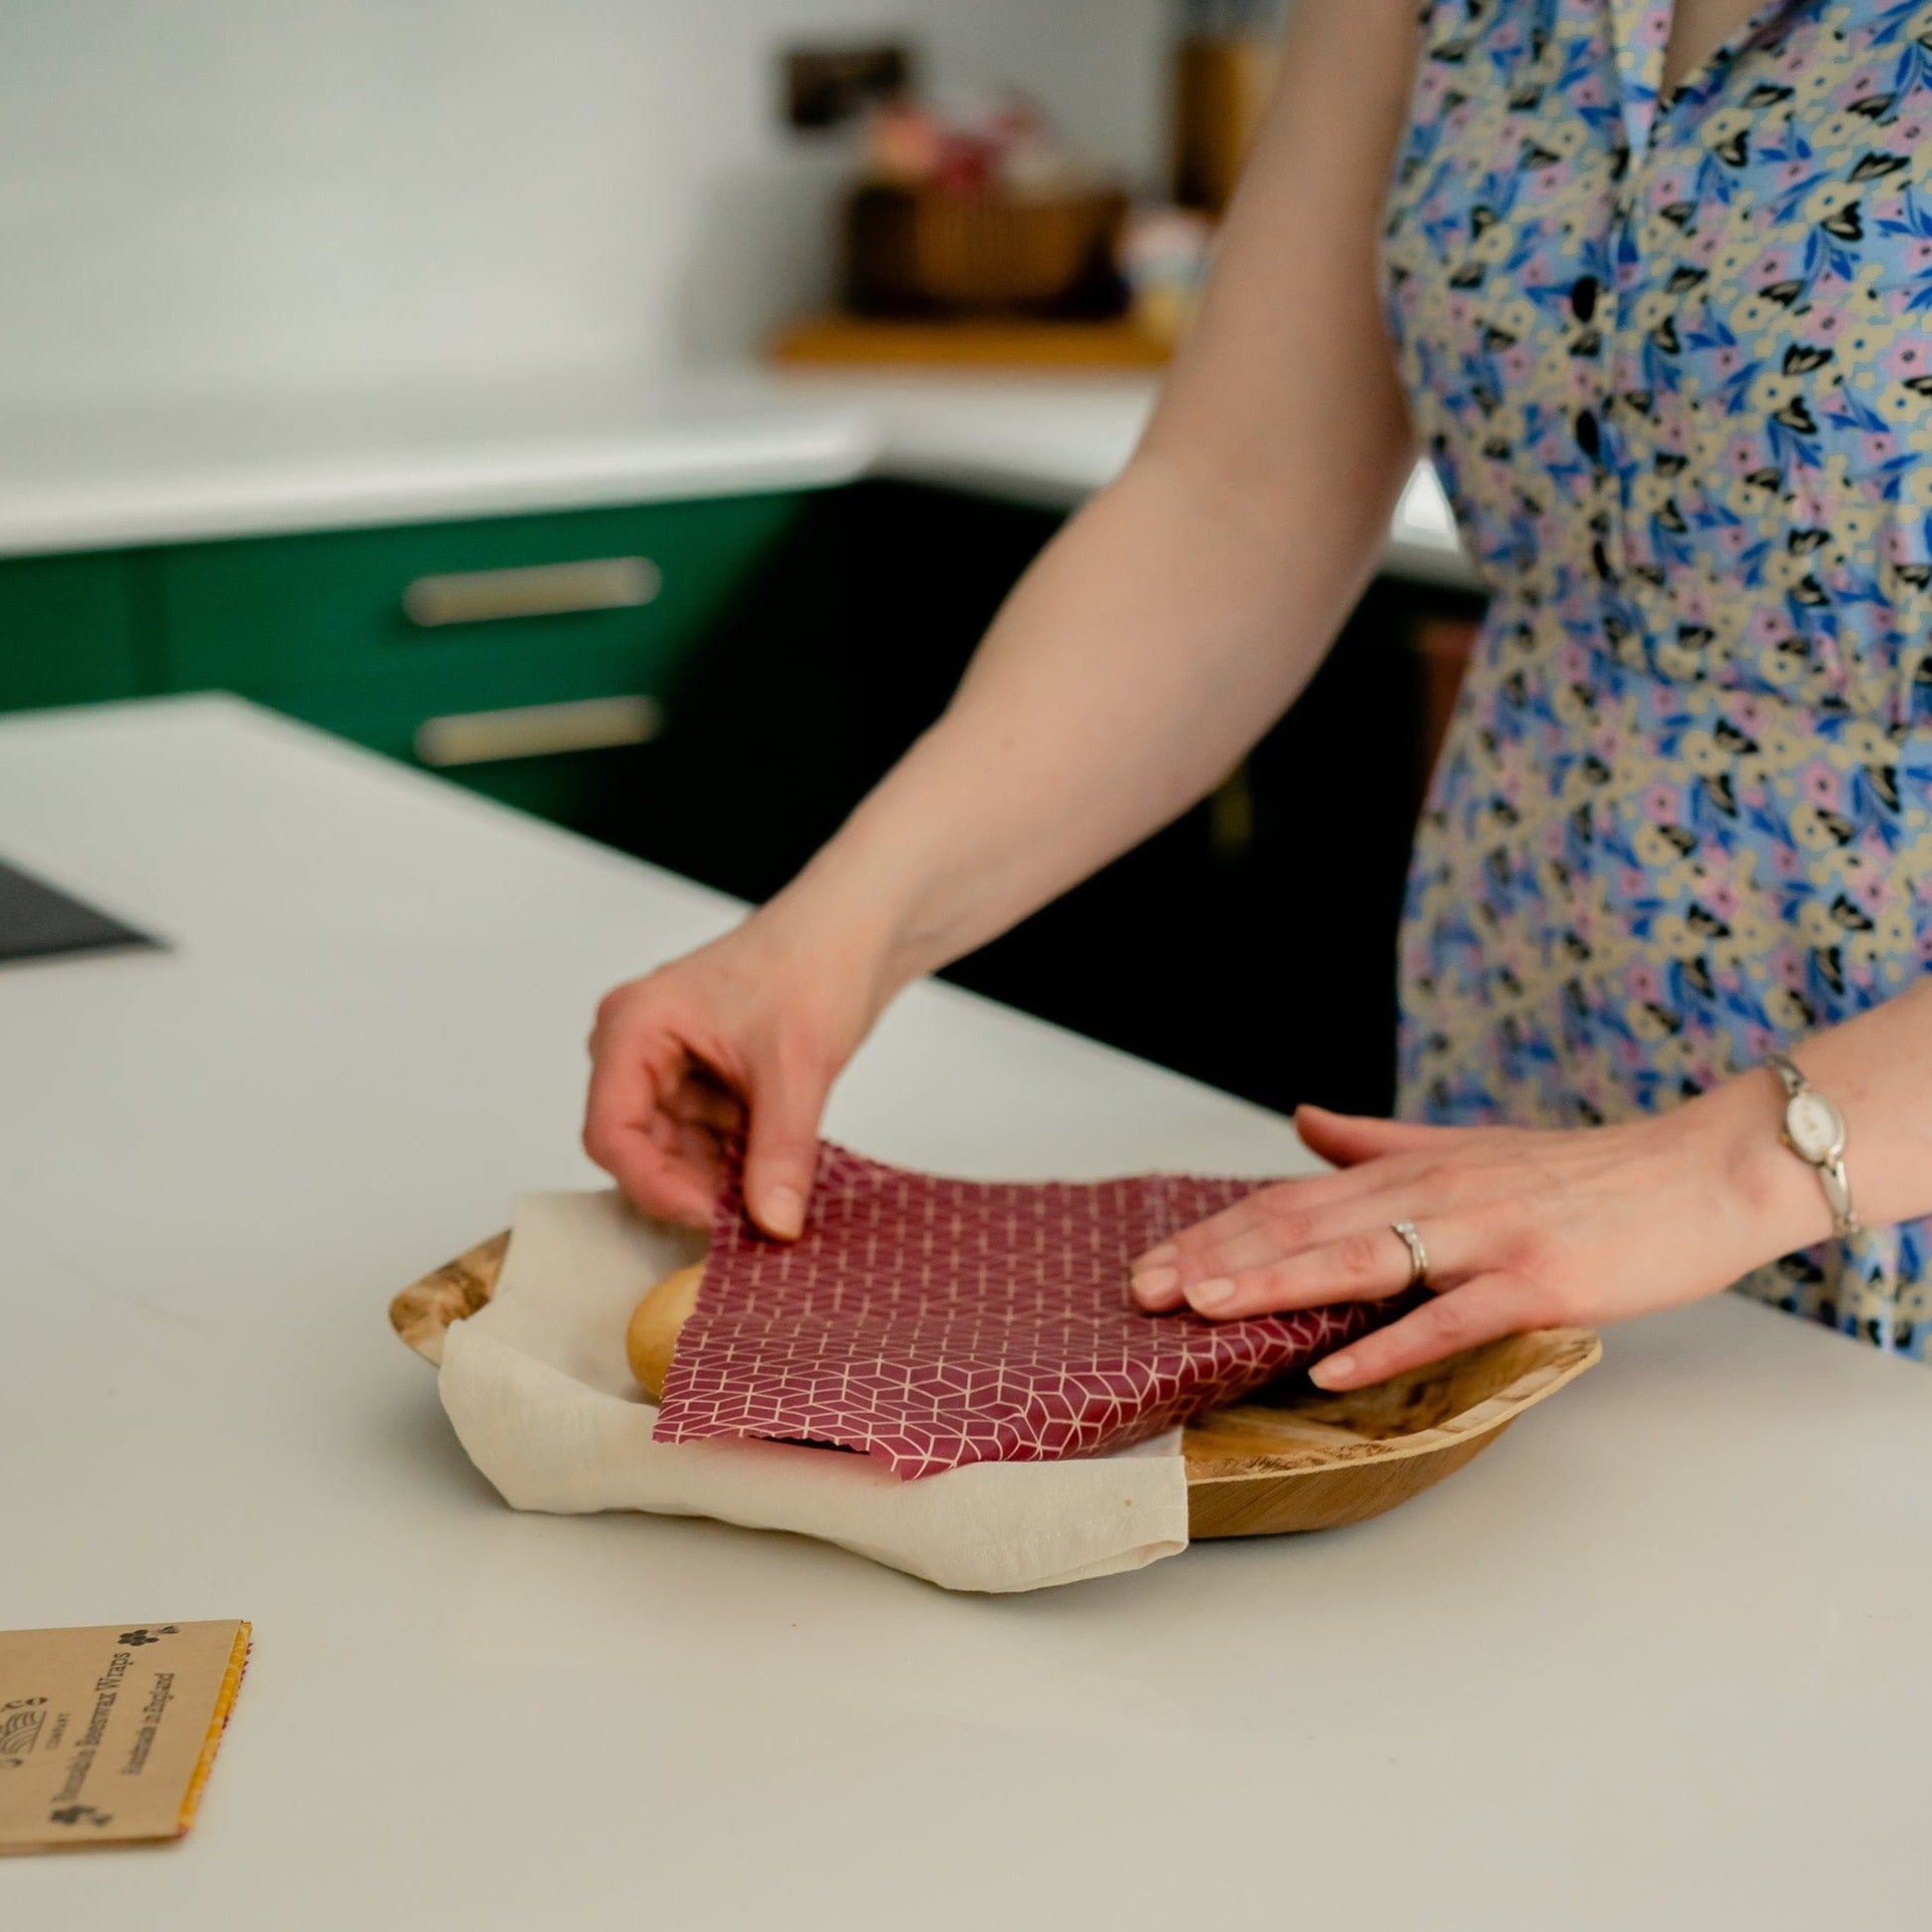 The Cotswold Eco Company Handmade Beeswax Wrap - Wrapping an apple pie